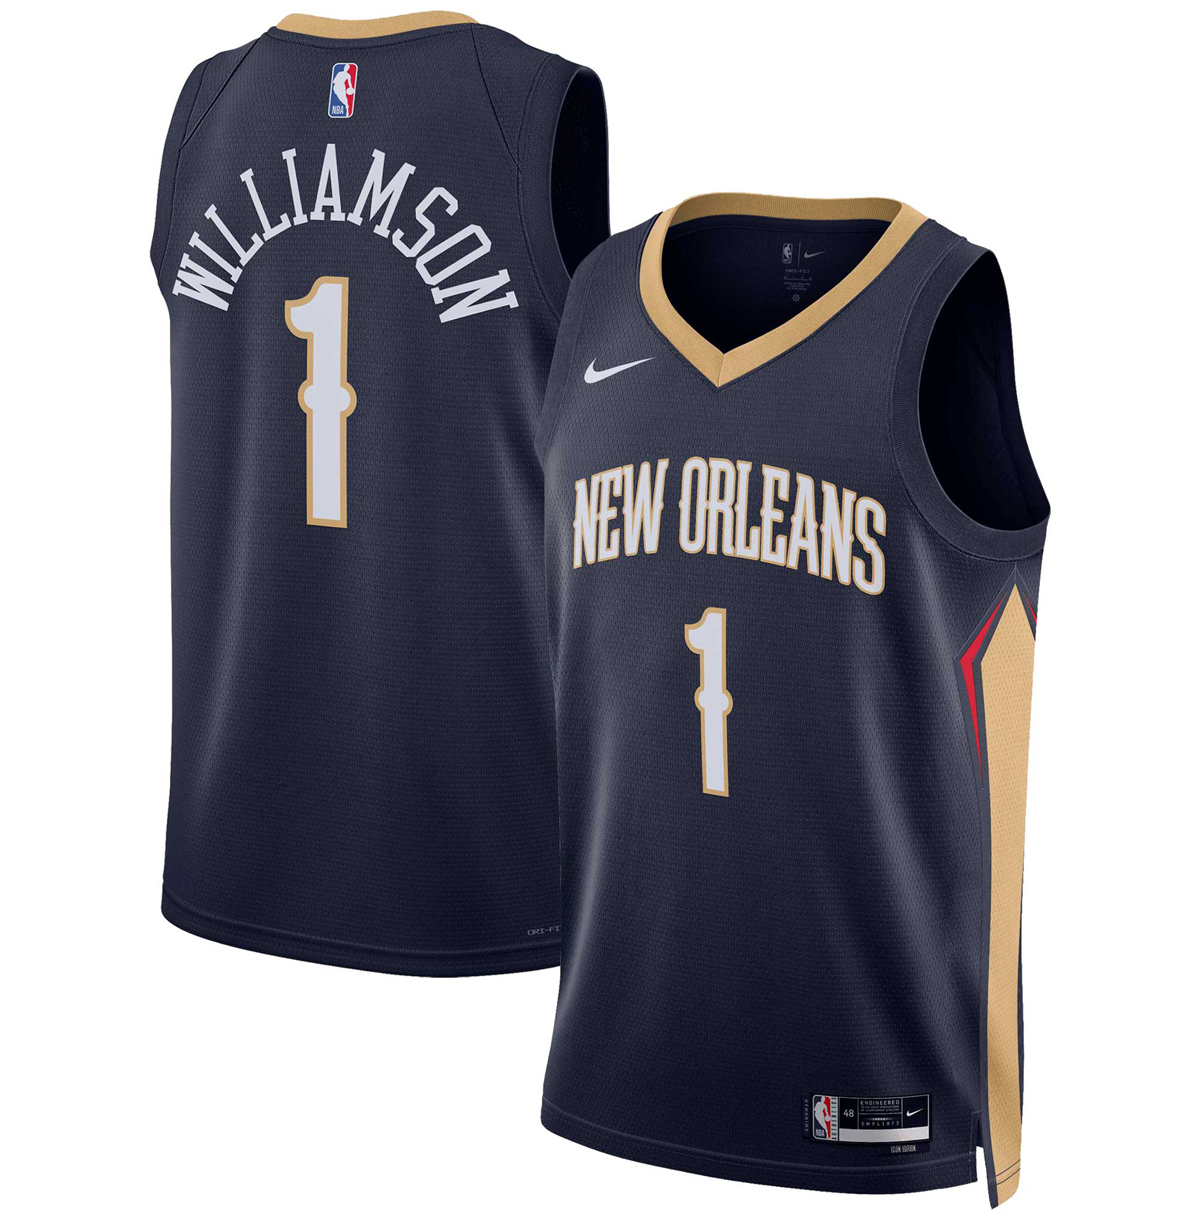 Zion-Williamson-New-Orleans-Pelicans-Nike-Jersey